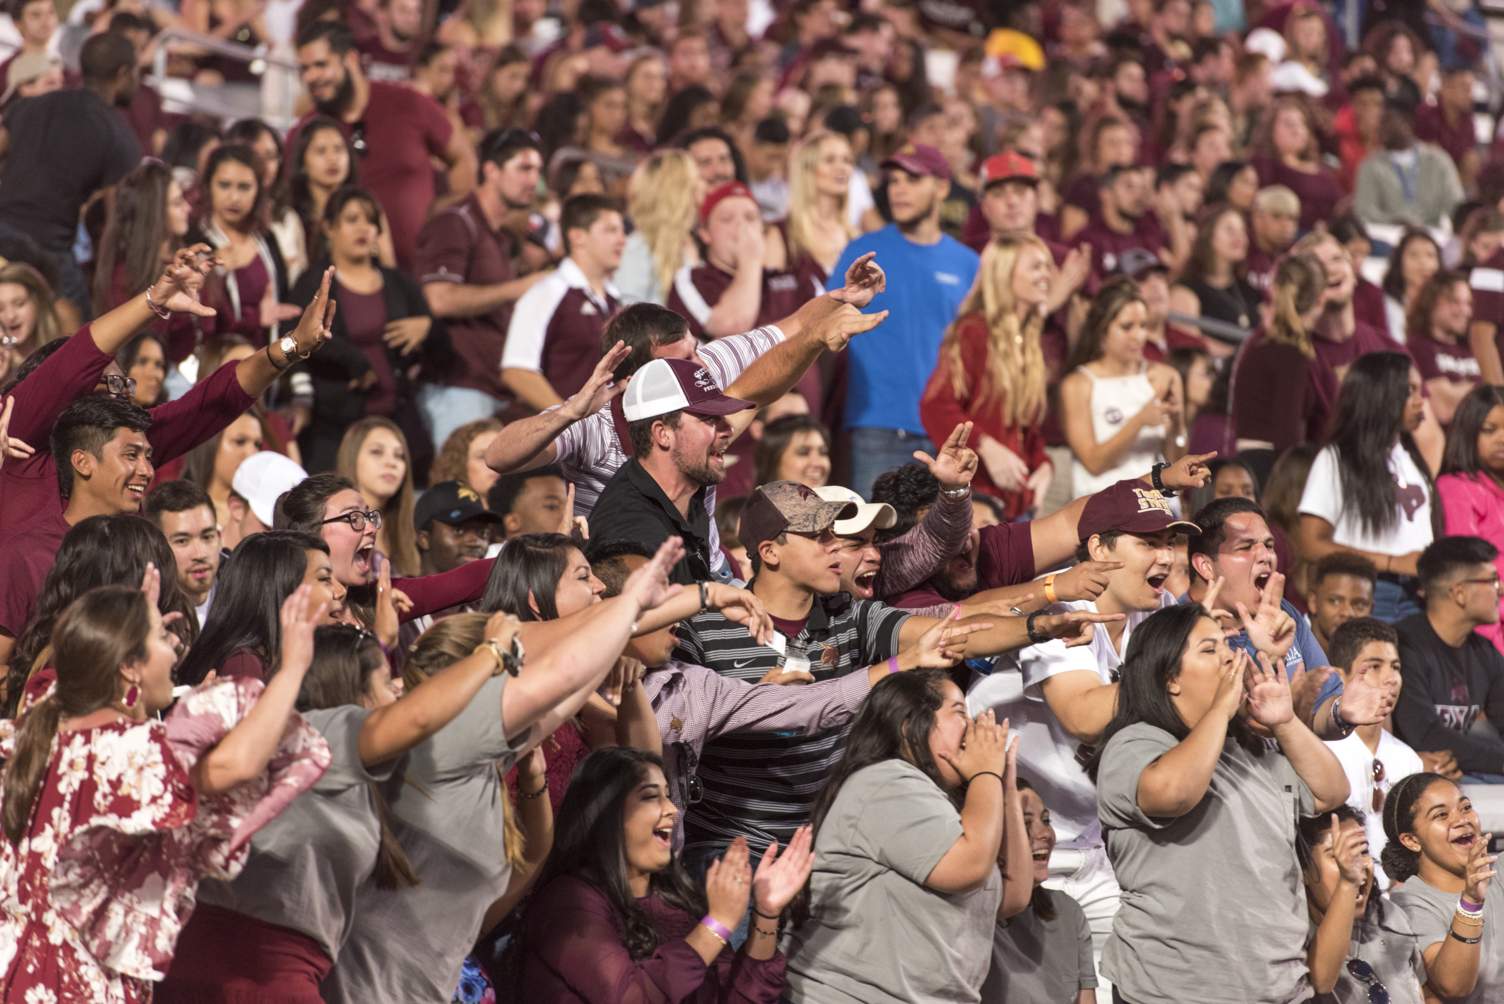 The loud crows cheering at a Texas State football game.